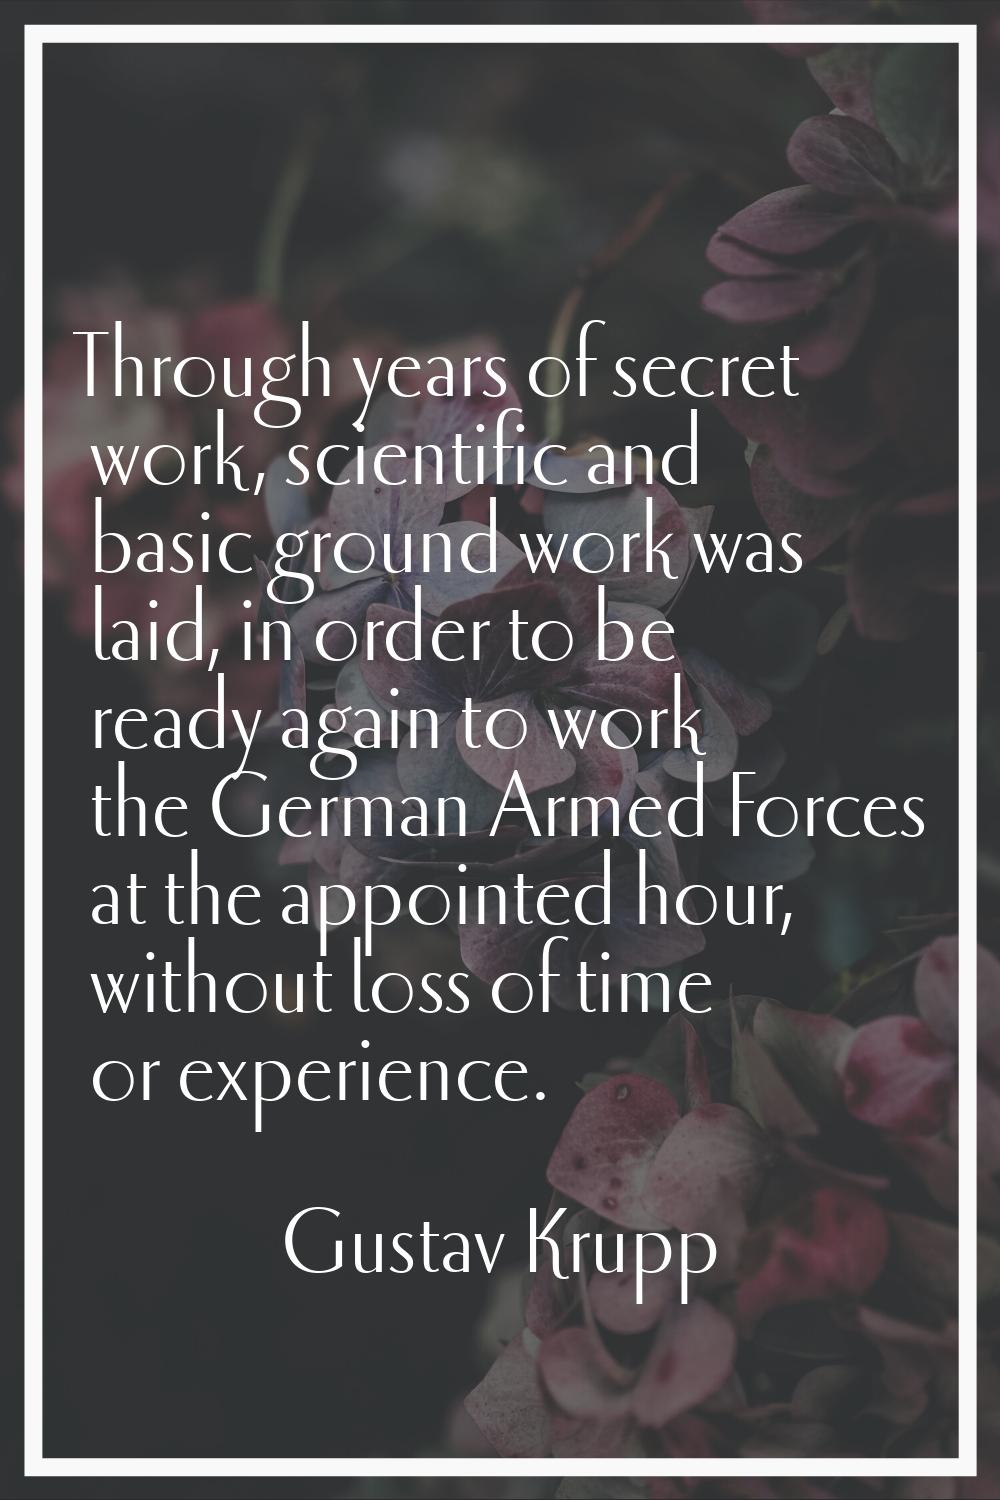 Through years of secret work, scientific and basic ground work was laid, in order to be ready again